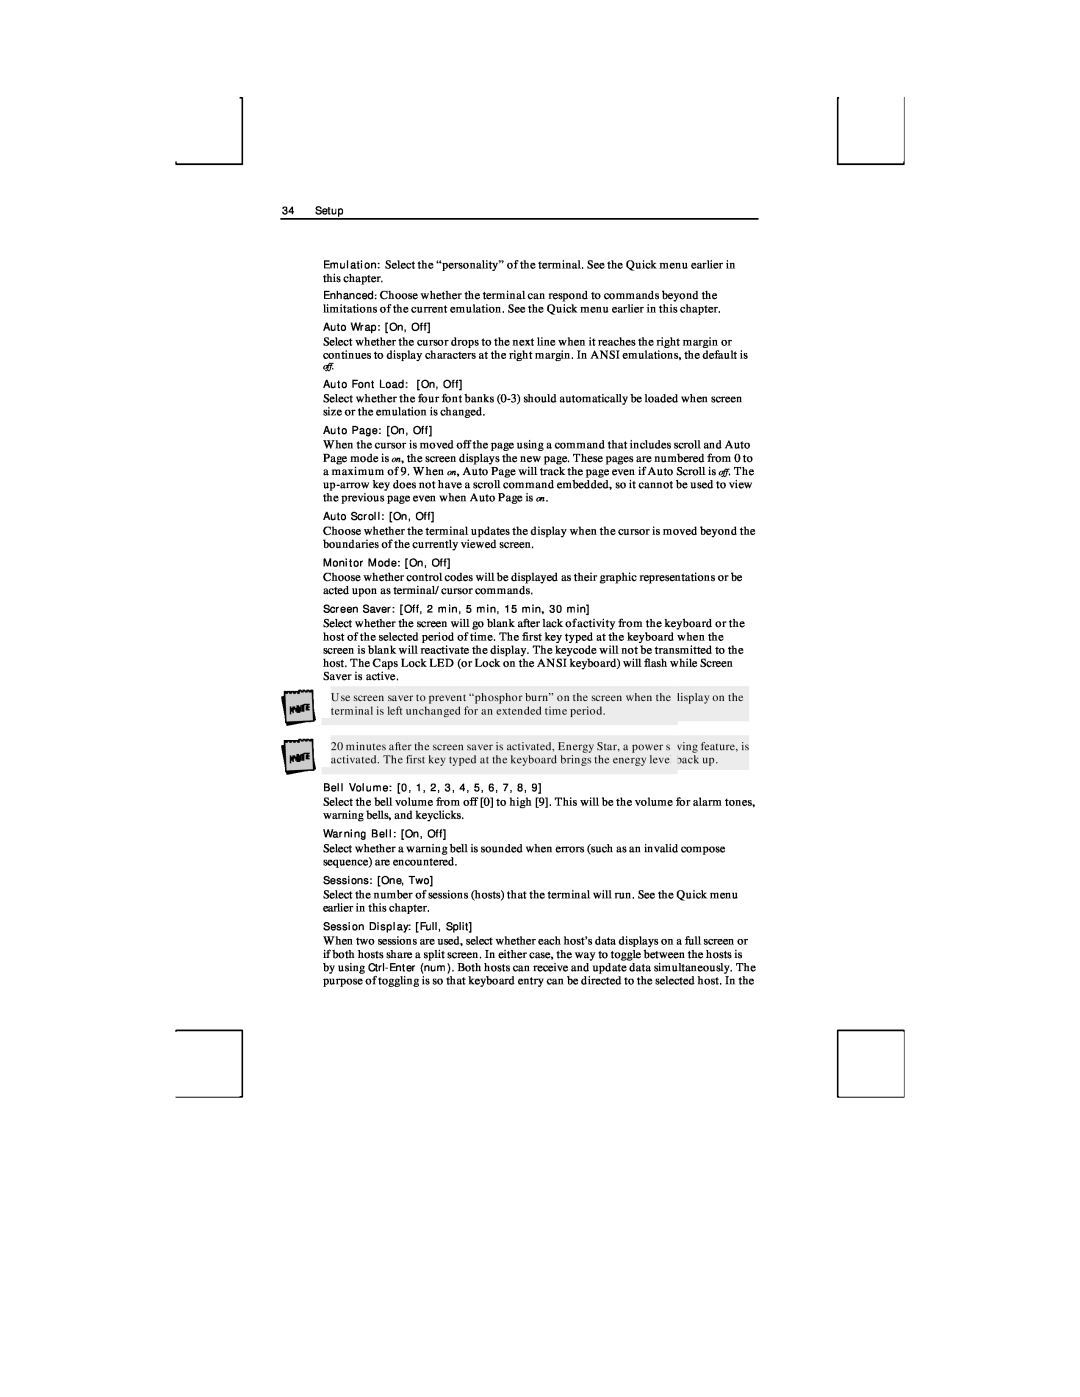 Boundless Technologies ADDS 3153 ASCII manual Setup, Auto Wrap On, Off, Auto Font Load On, Off, Auto Page On, Off 